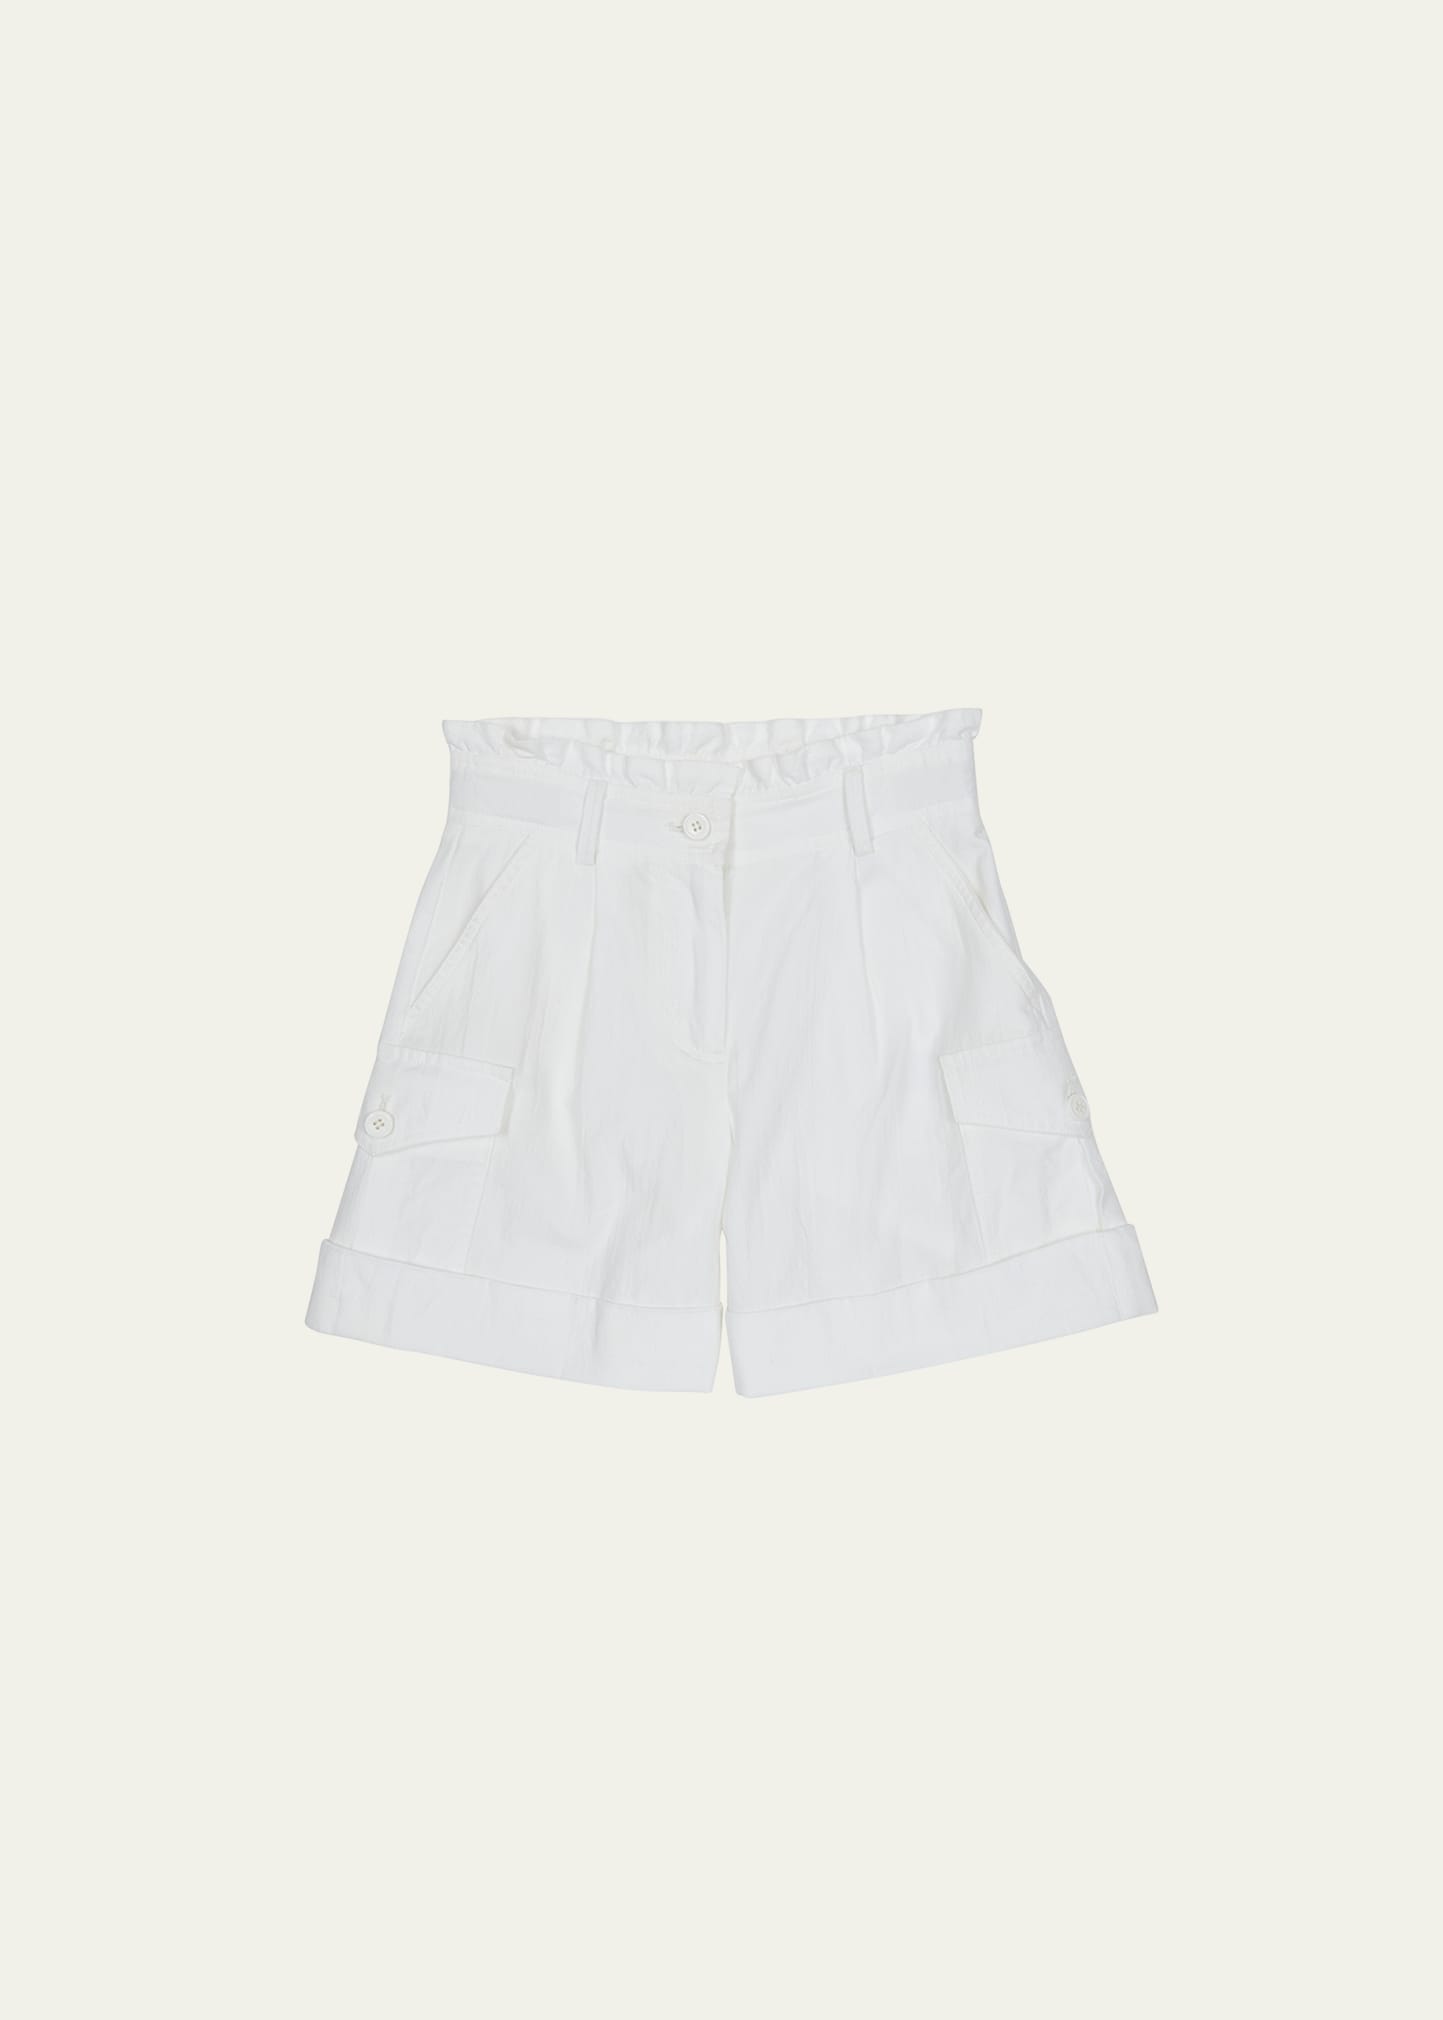 Girl's Paper Bag Shorts, Size 4-6